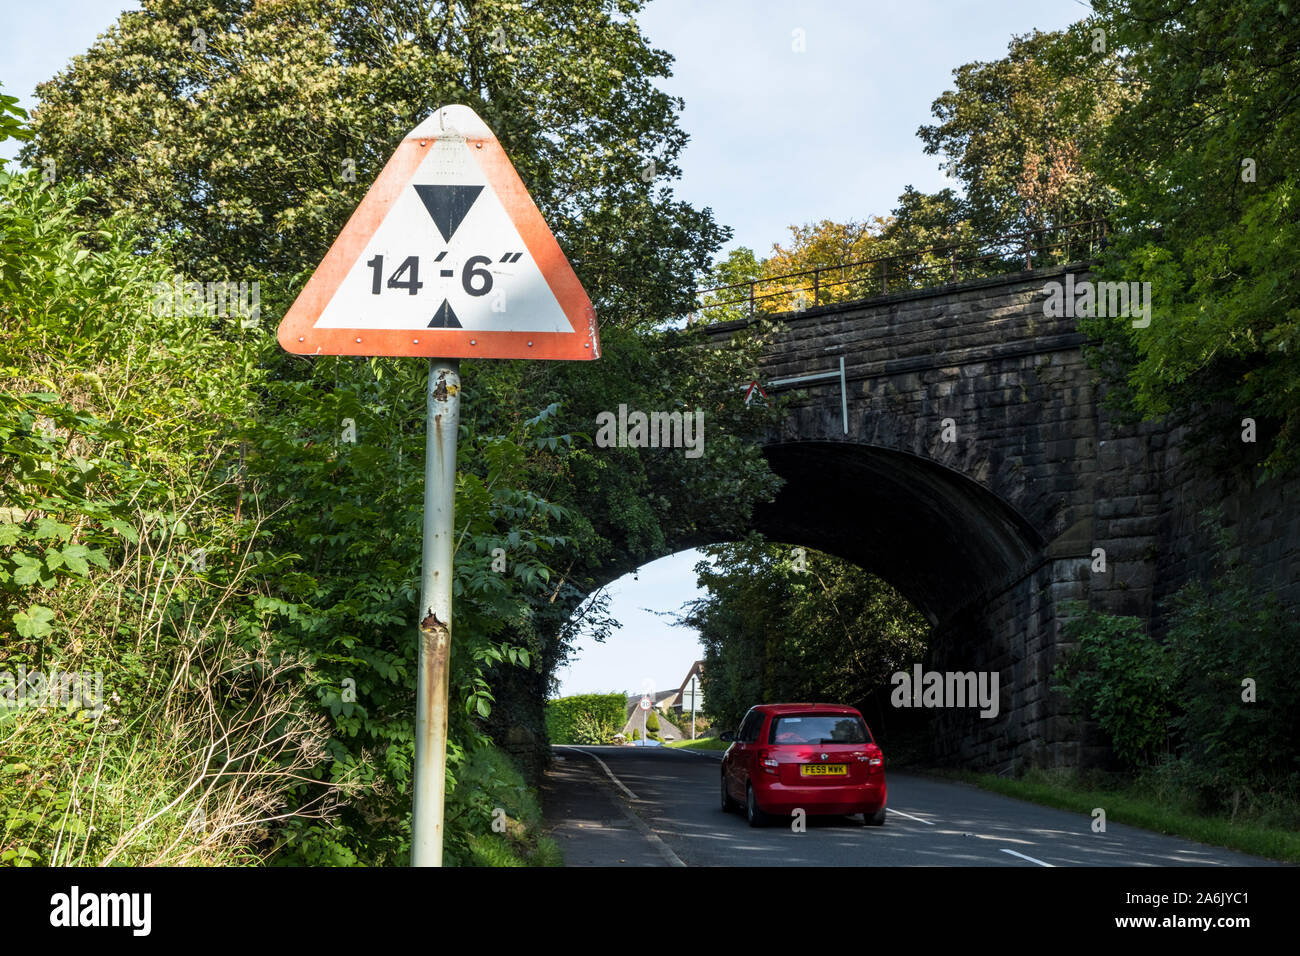 Road sign warning of a bridge with a height limit, Hathersage, Derbyshire, England, UK Stock Photo